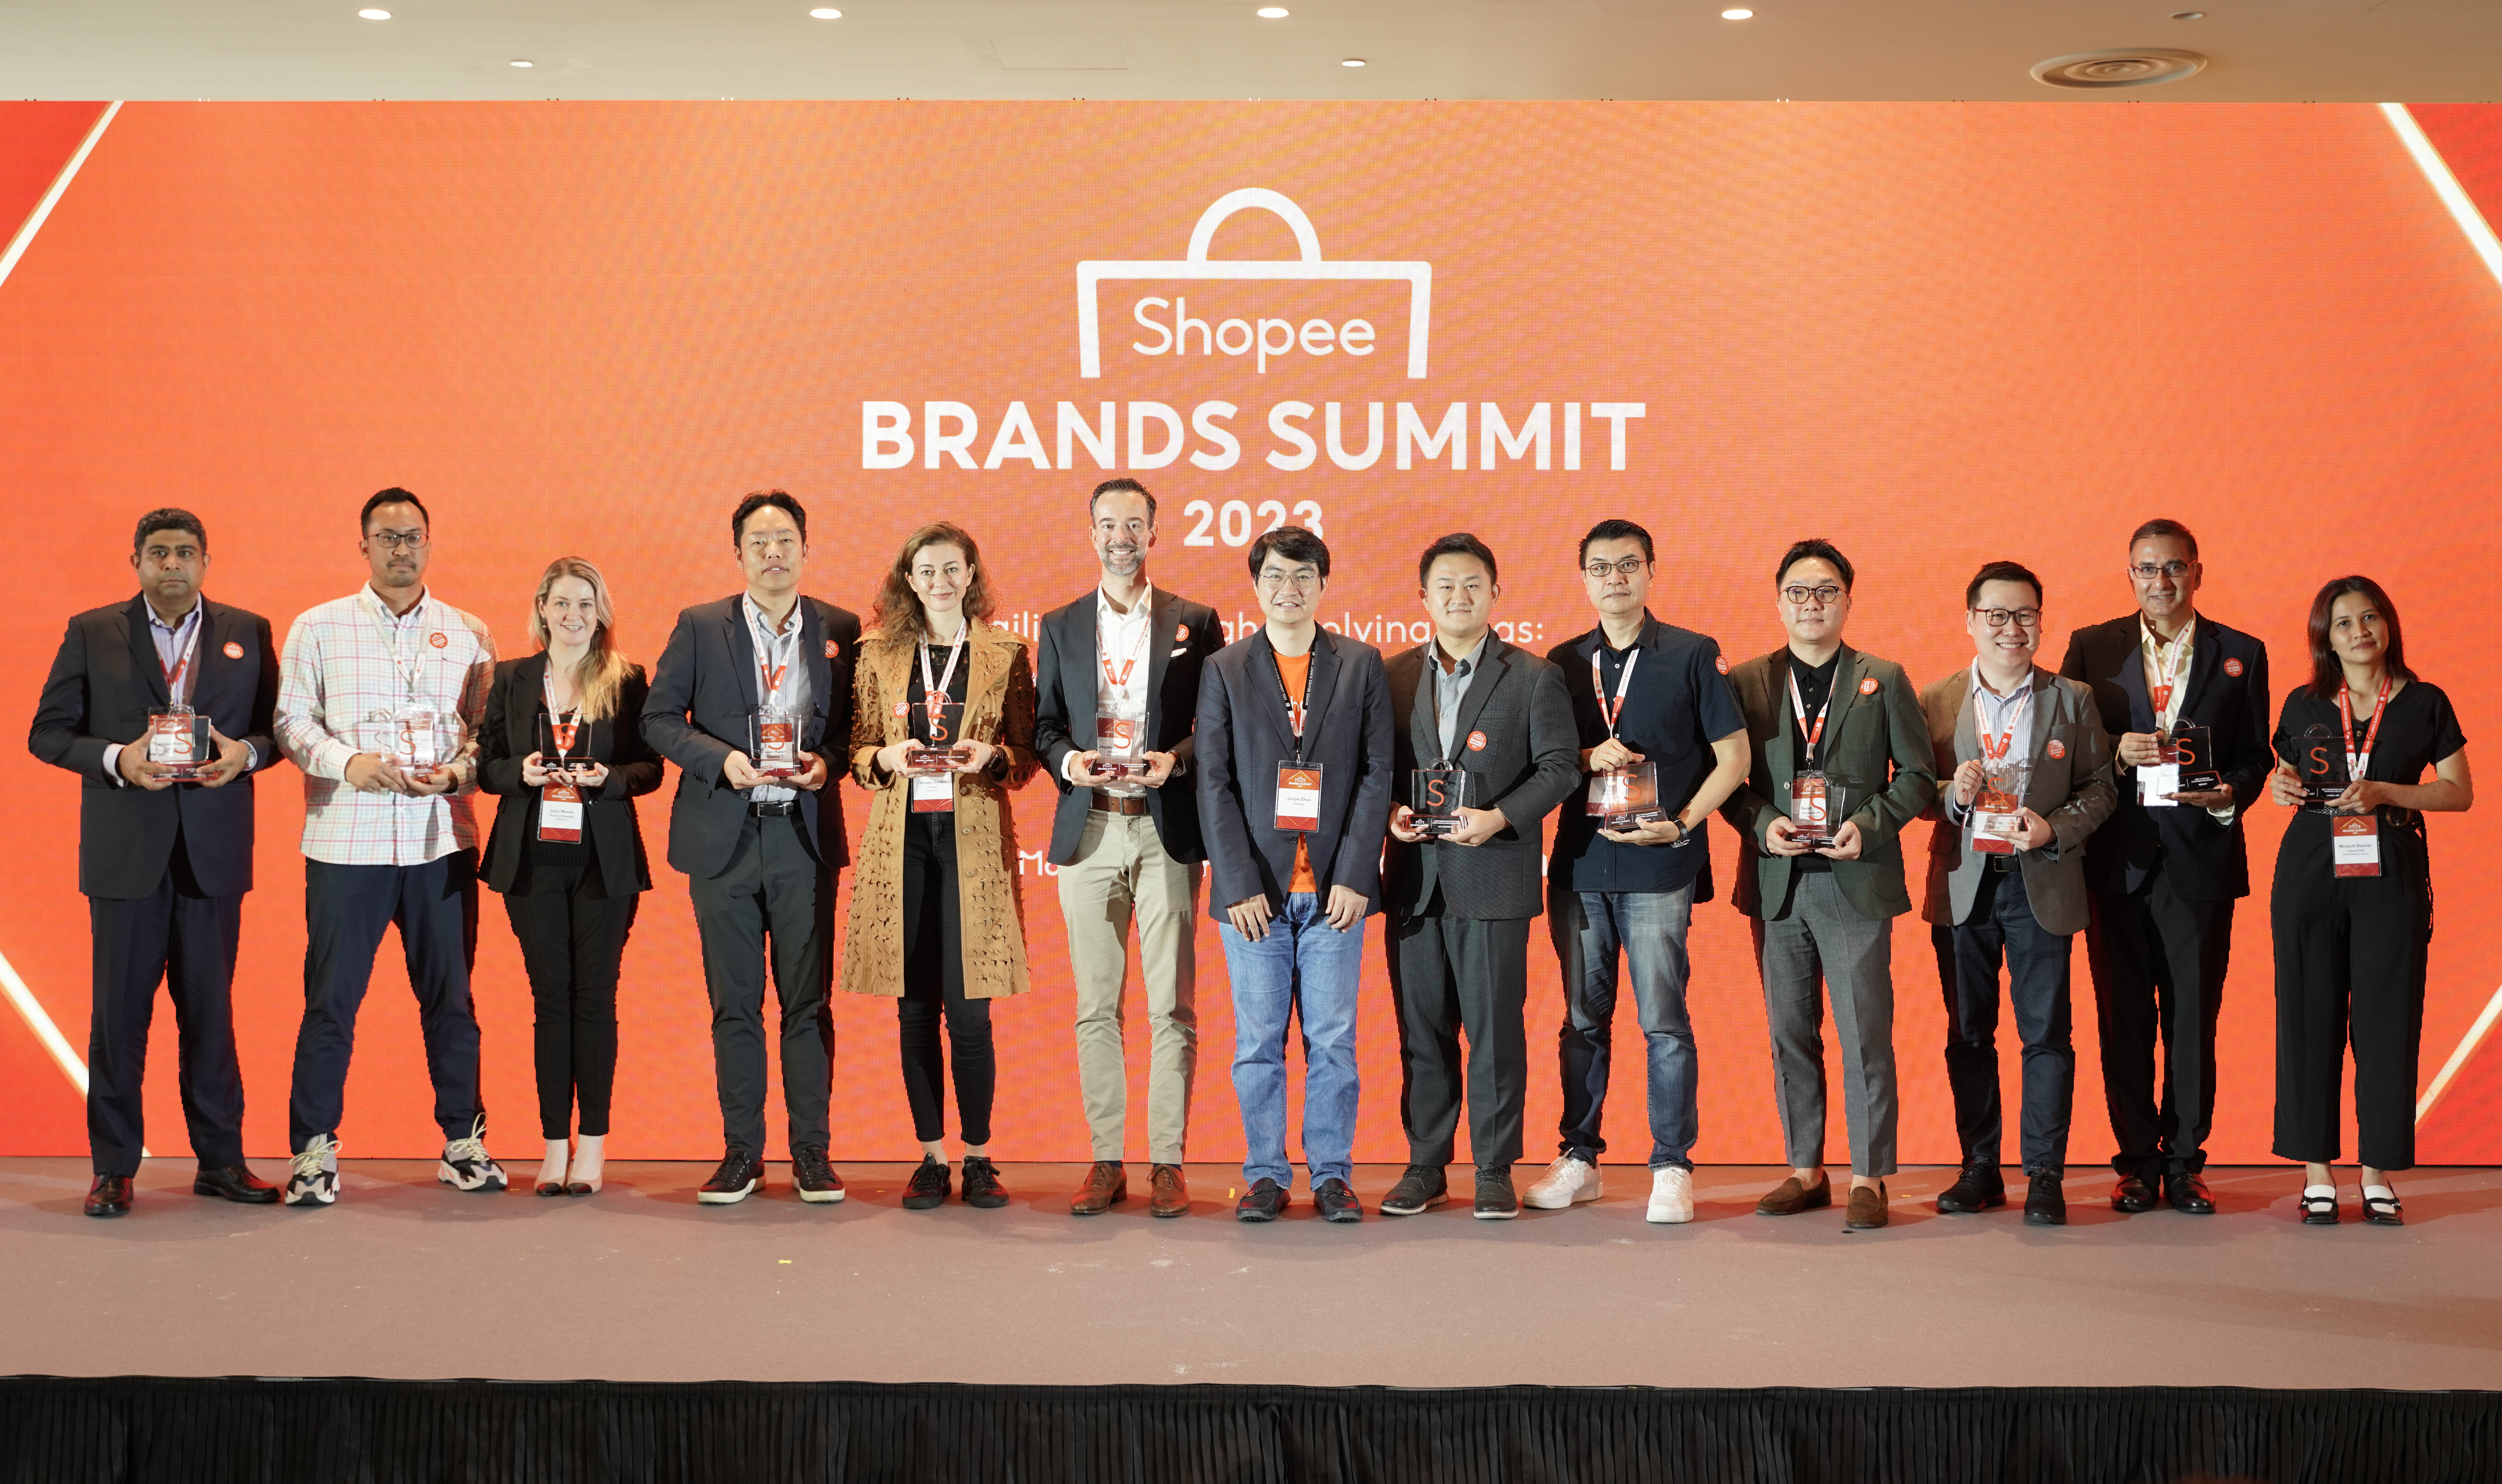 Shopee Brands Summit 2023 Award Winners with Junjie Zhou, Chief Commercial Officer at Shopee (From Left to Right: Adityea Kapoor from Abbott, Giraldi Jusuf from Adidas, Lucy Moran from Procter & Gamble, Shawn Kwon from Samsung, Yosser Zmitri from L